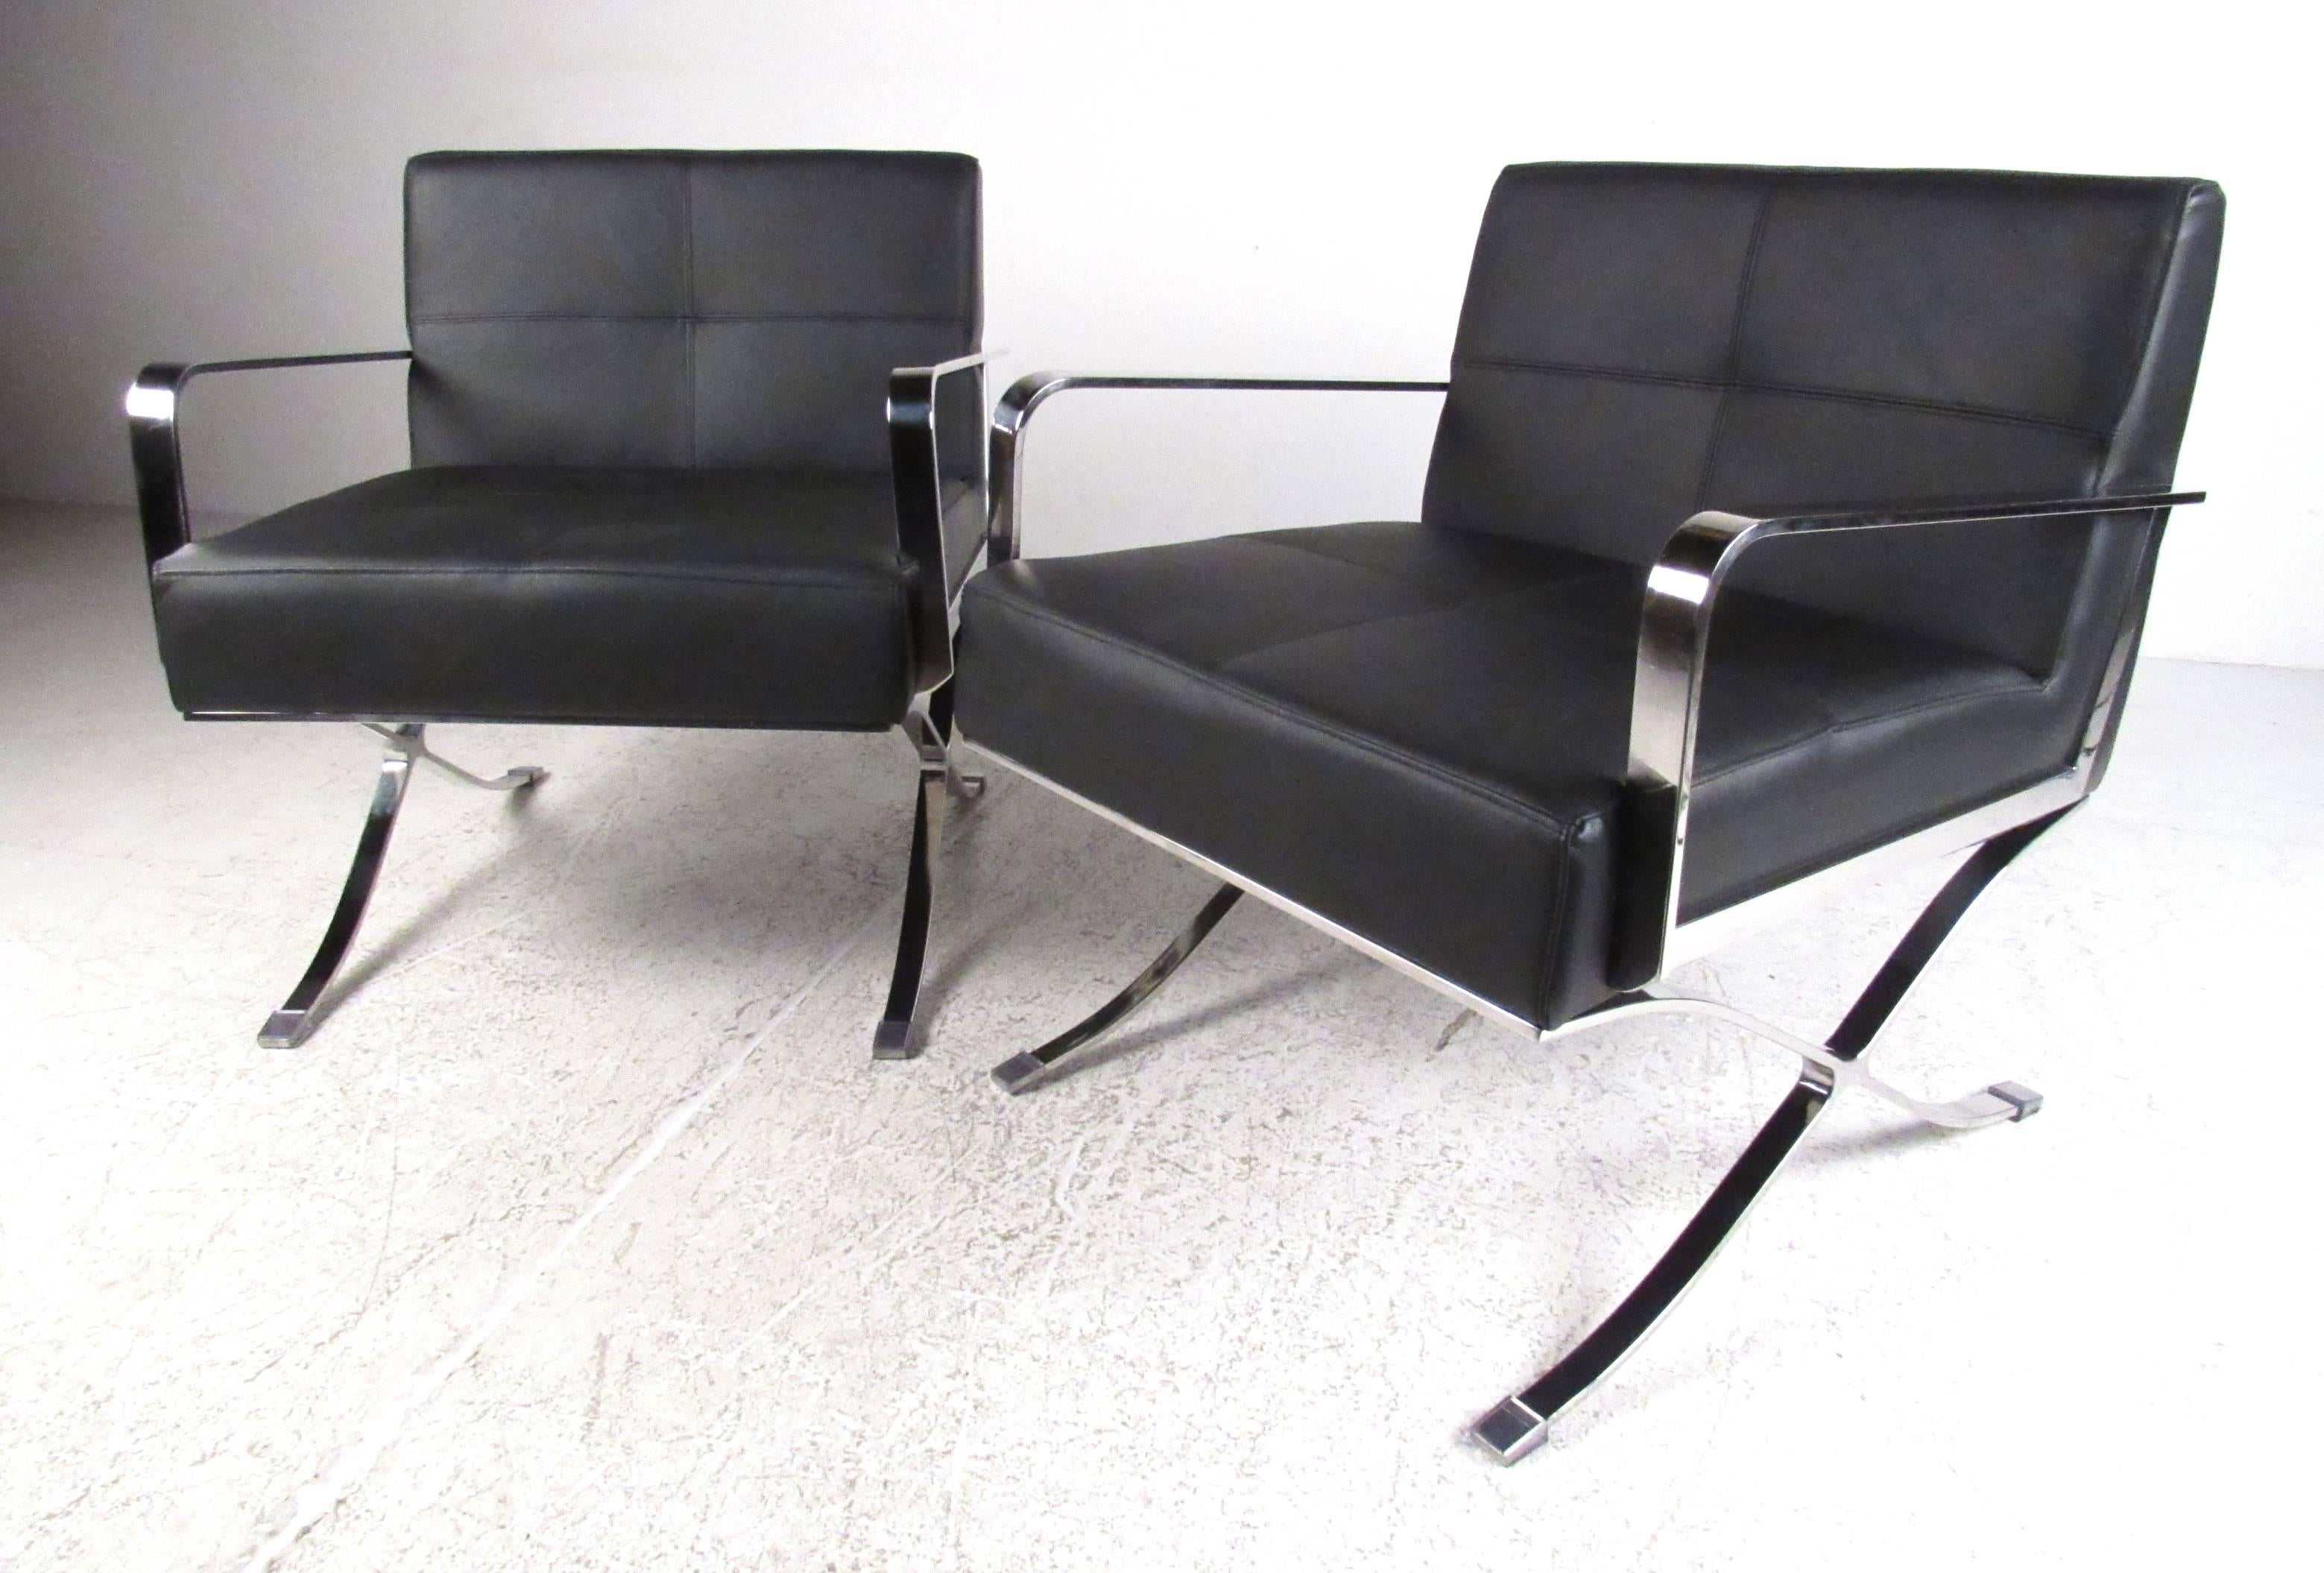 Very attractive and comfortable mid century modern style lounge chairs with heavy weight chrome frame and faux leather textured upholstery, Perfect addition to a contemporary home or office environment.